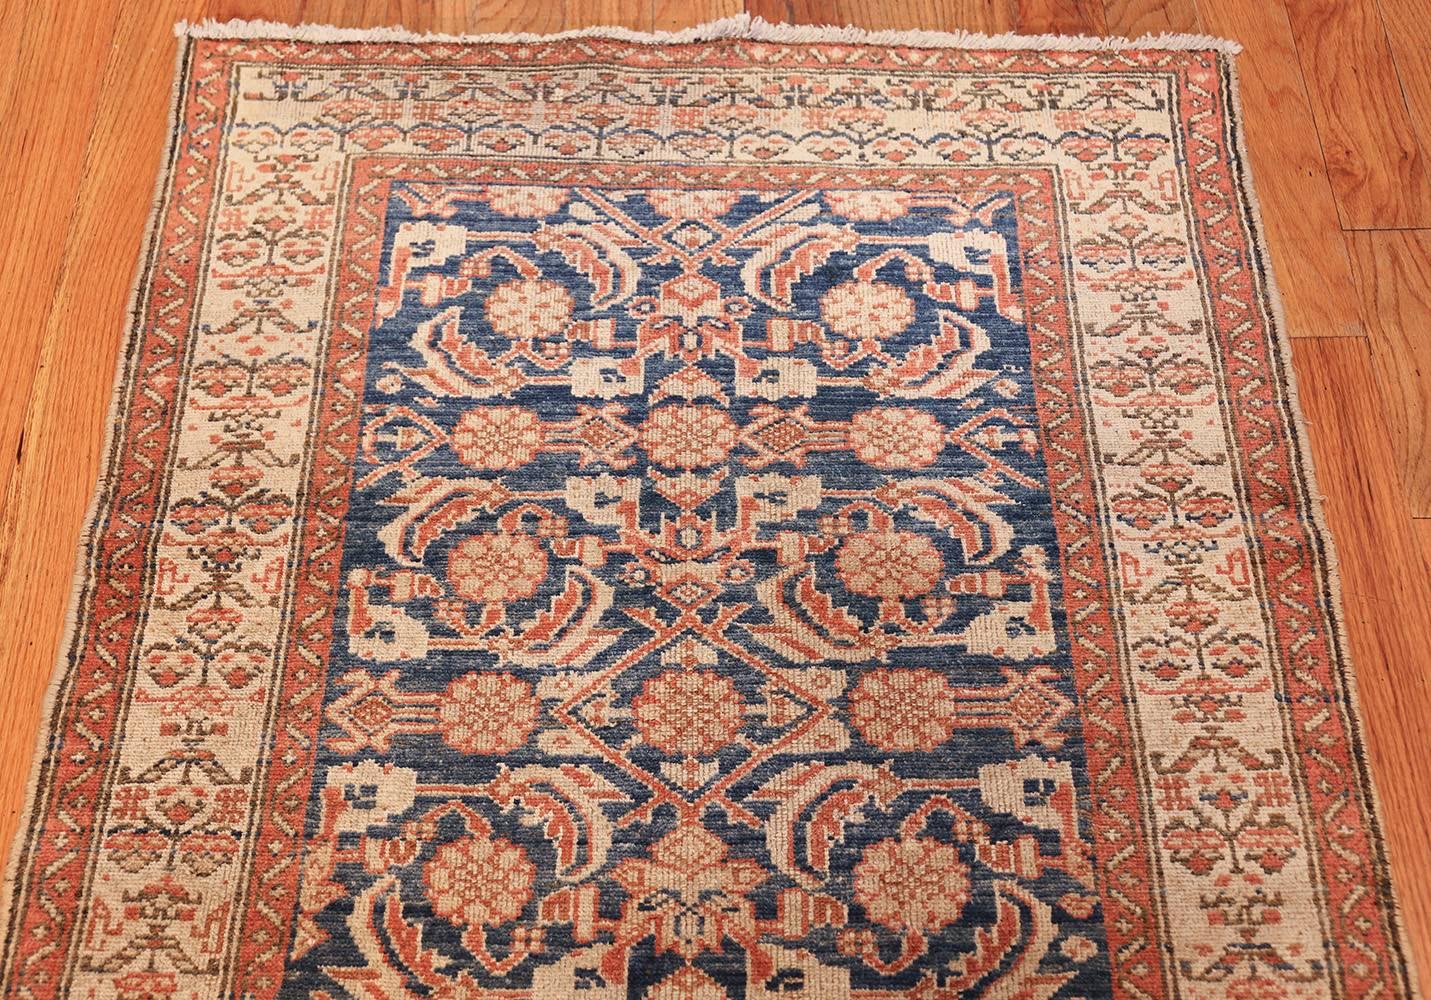 Antique Persian Malayer Hallway Runner Rug. Size: 3 ft 2 in x 16 ft 10 in  1